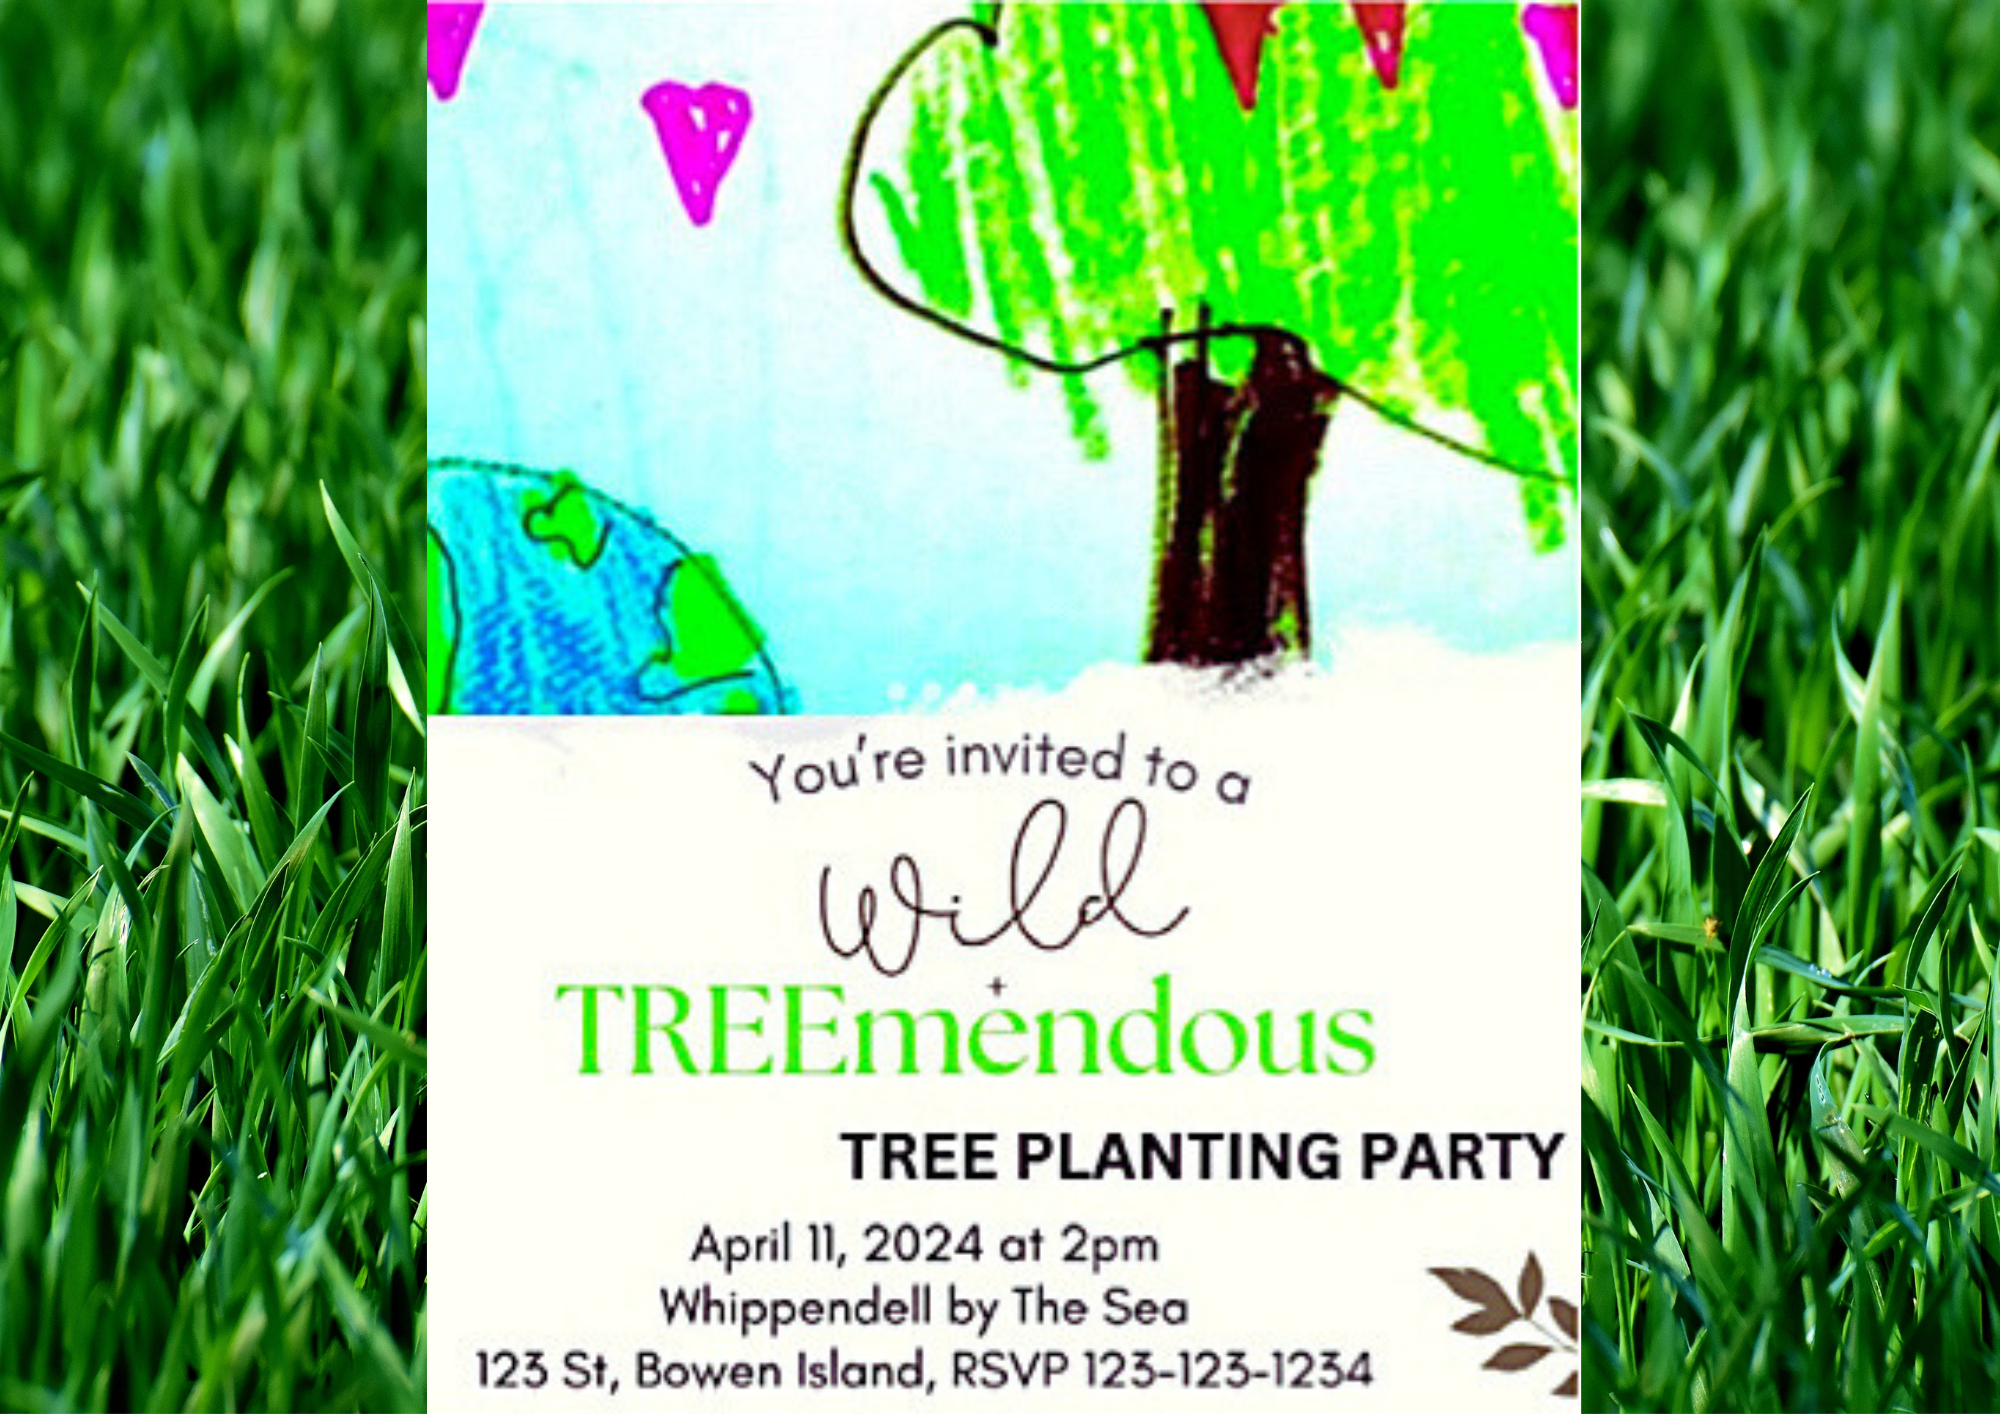 A sample invitation to a tree planting party